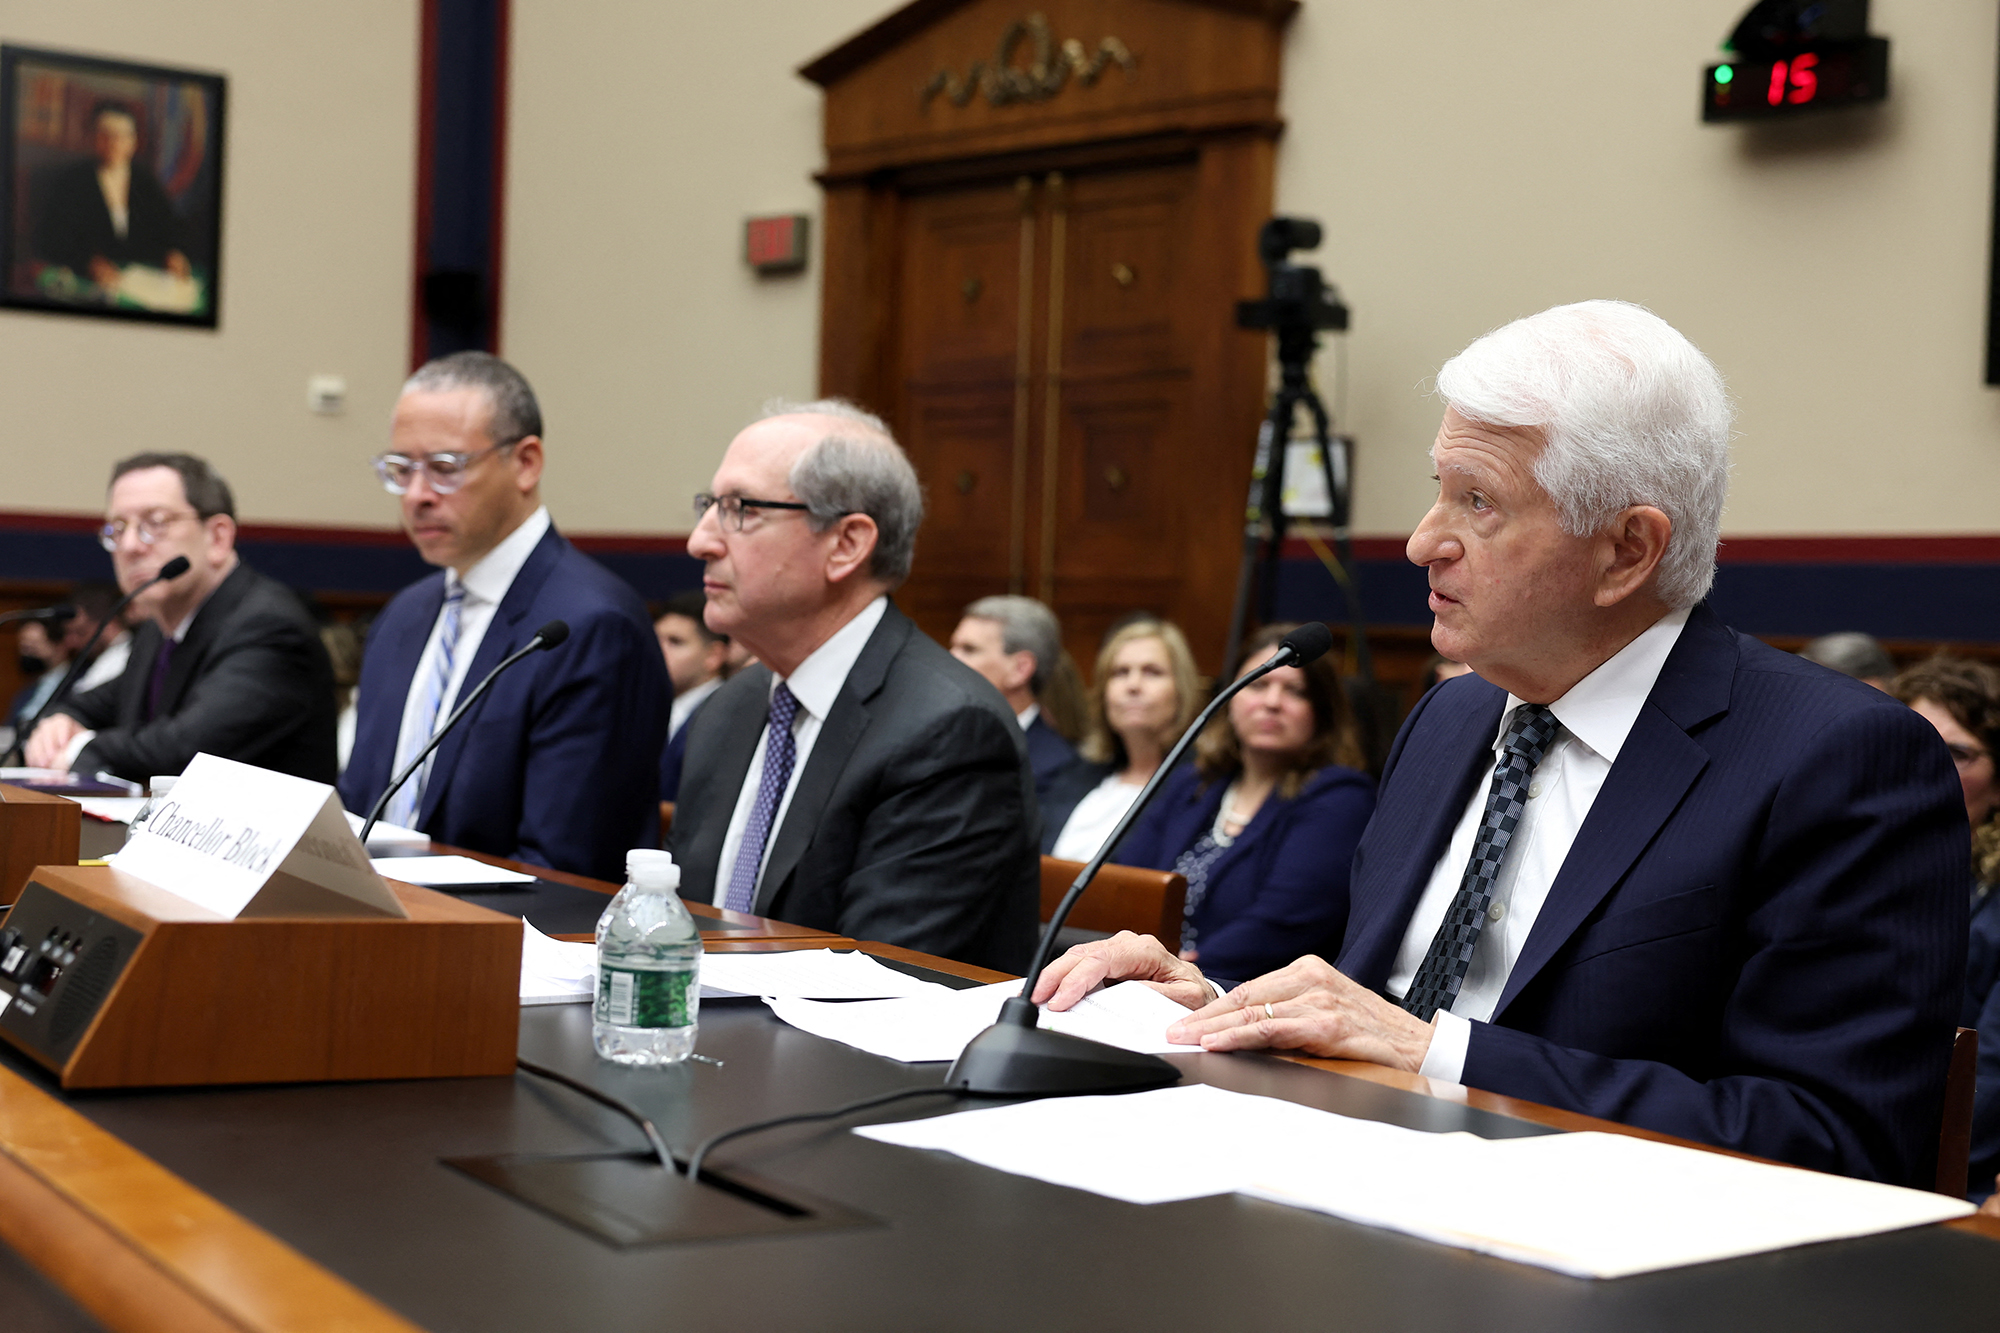 From left: Michael Schill, president of Northwestern University, Jonathan Holloway, president of Rutgers University, Frederick M. Lawrence, secretary and CEO, The Phi Beta Kappa Society, and Gene Block, chancellor of the UCLA, during a House Education and the Workforce Committee hearing on pro-Palestinian protests on college campuses, on Capitol Hill in Washington on May 23.